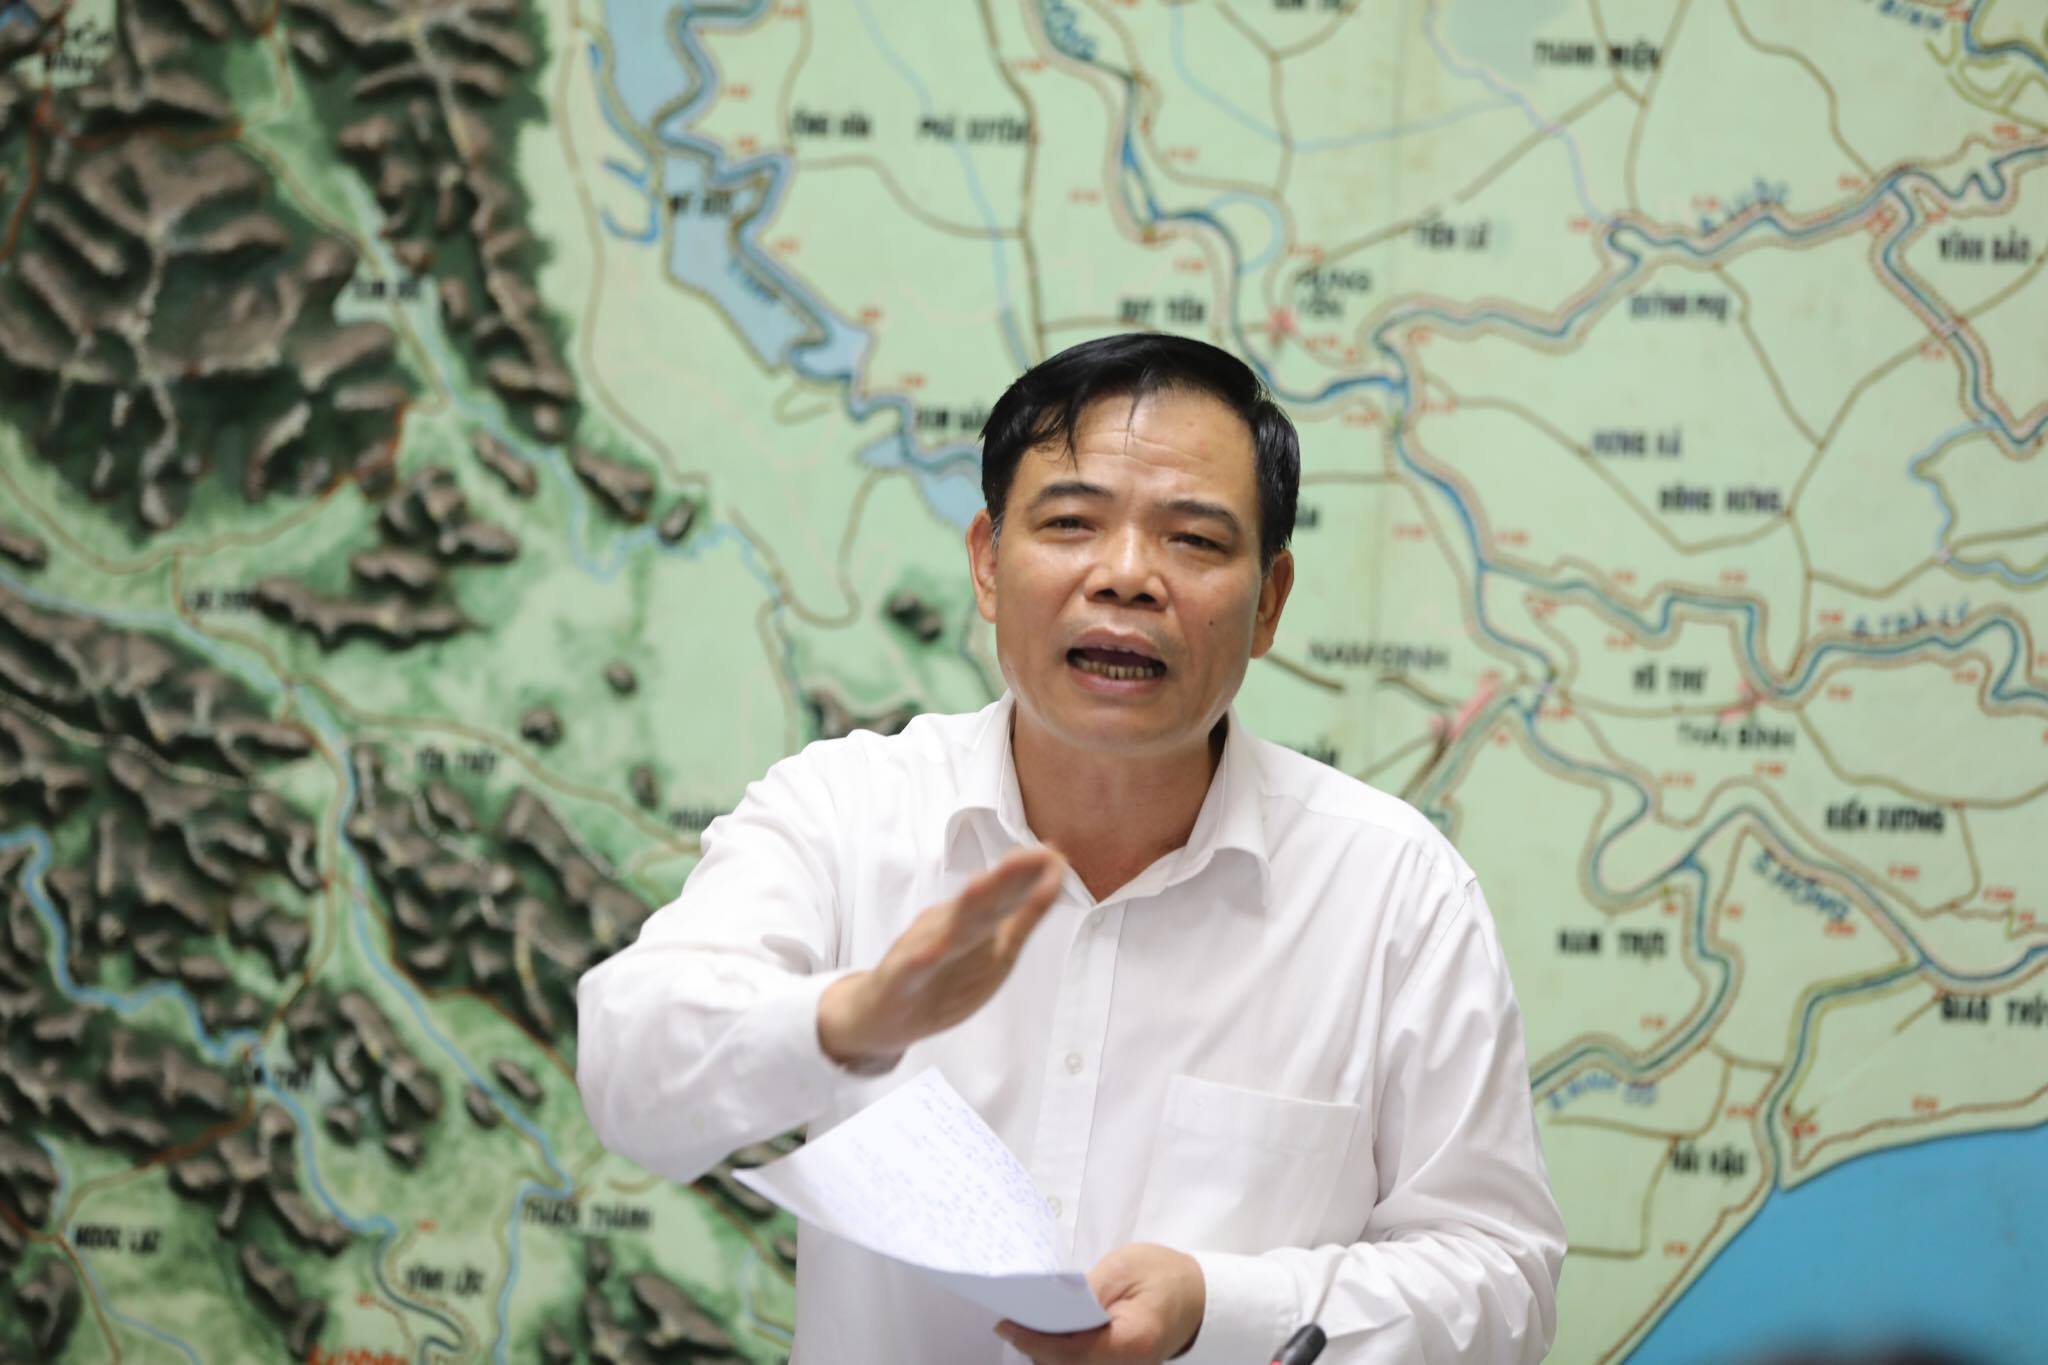 Nguyen Xuan Cuong, Minister of Agriculture and Rural Development, speaks at a meeting on October 15, 2017. Photo: Tuoi Tre